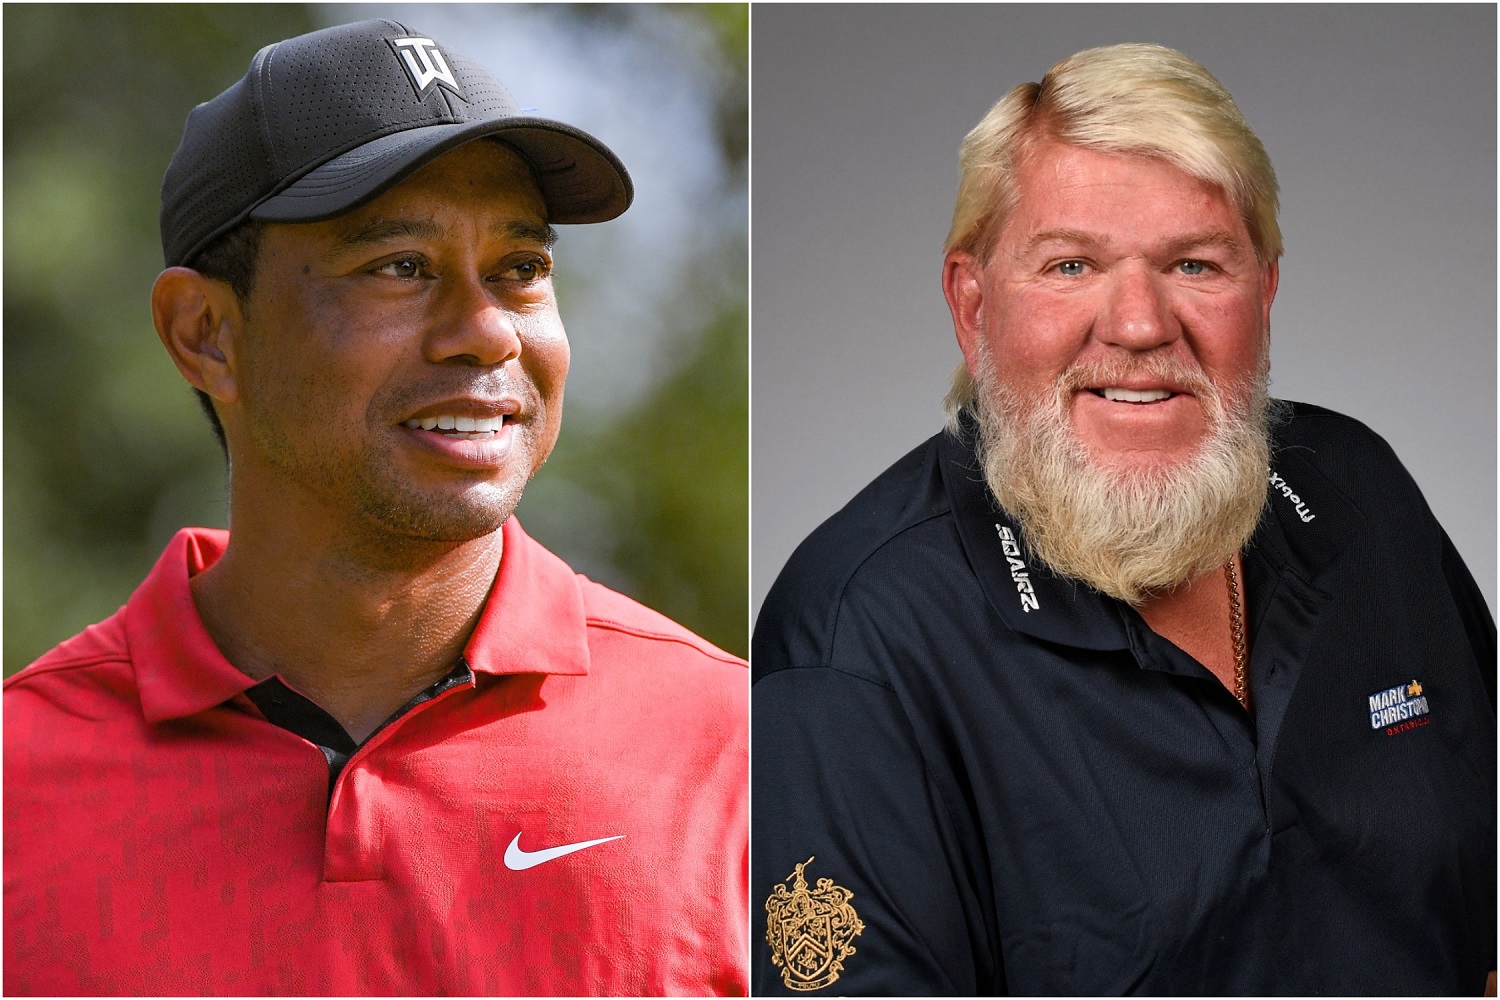 John Daly Calls ‘No Harm, No Foul’ on Tiger Woods’ Much-Discussed Criticism of Him